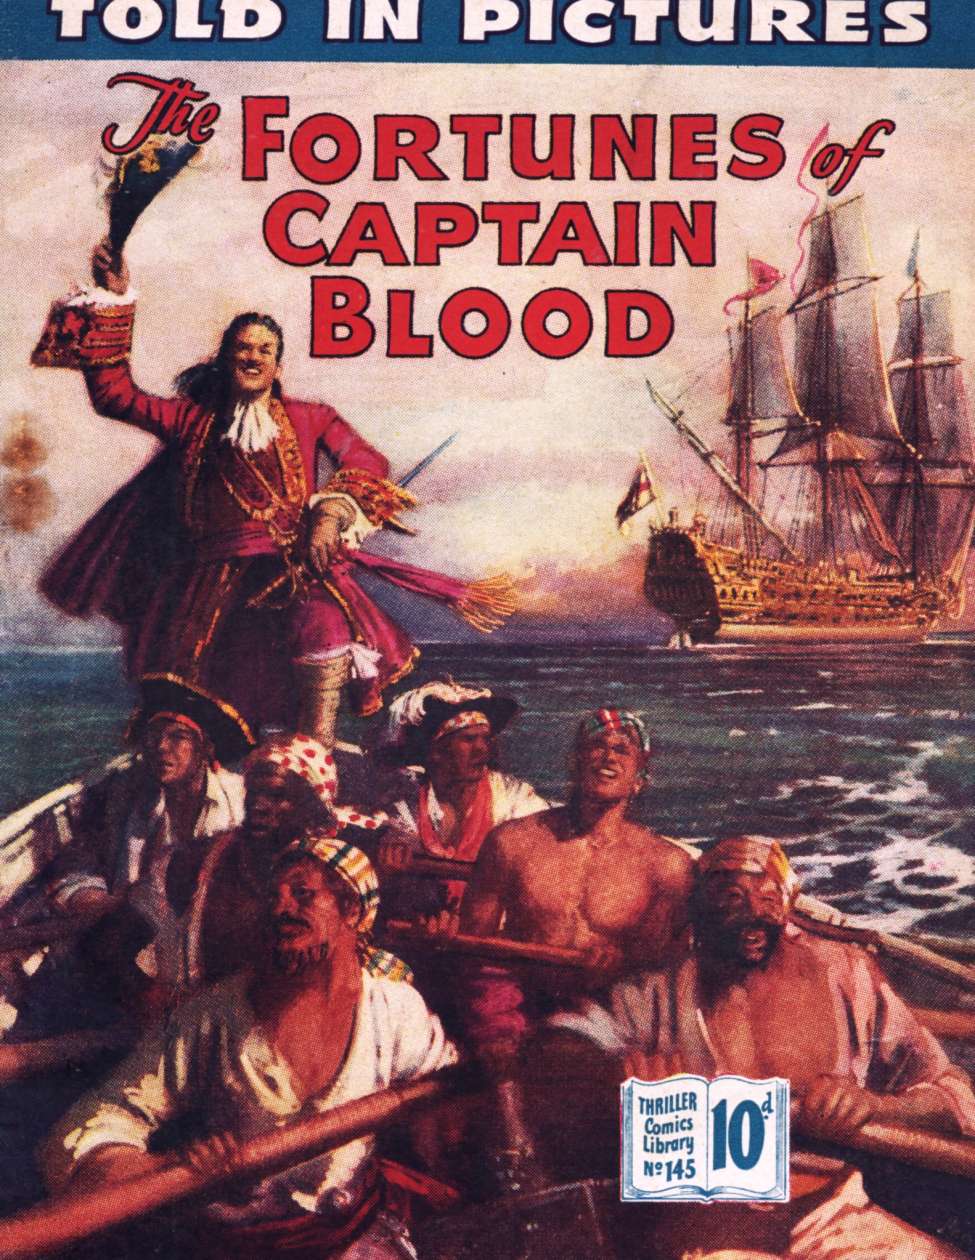 Book Cover For Thriller Comics Library 145 - The Fortunes of Captain Blood